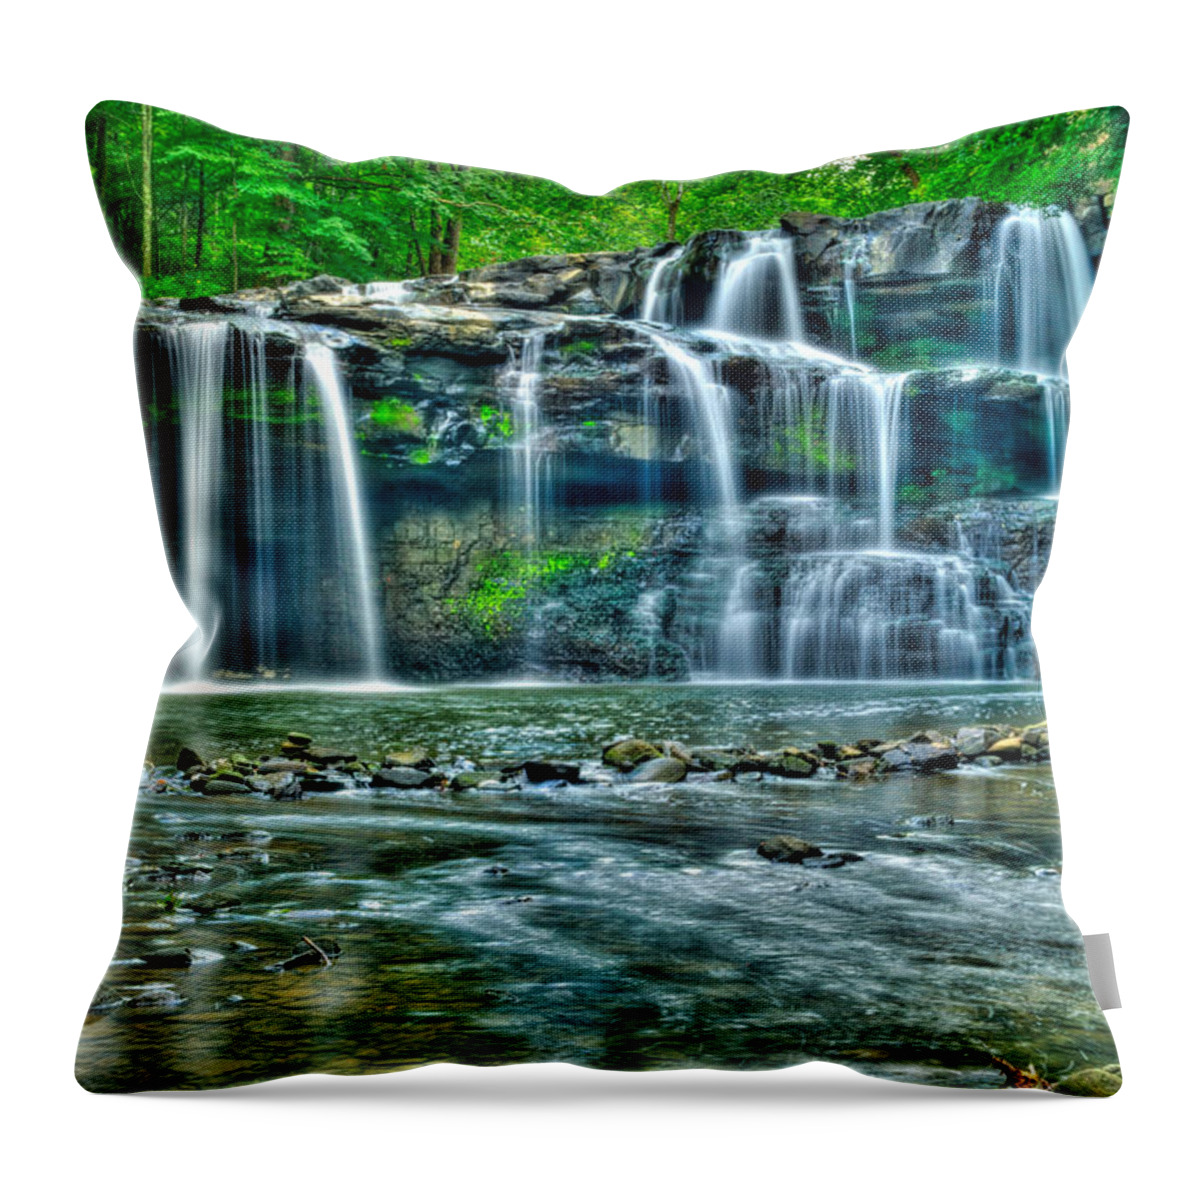 Bush Throw Pillow featuring the photograph Brush Creek Falls 3821 19 20 by Michael Peychich